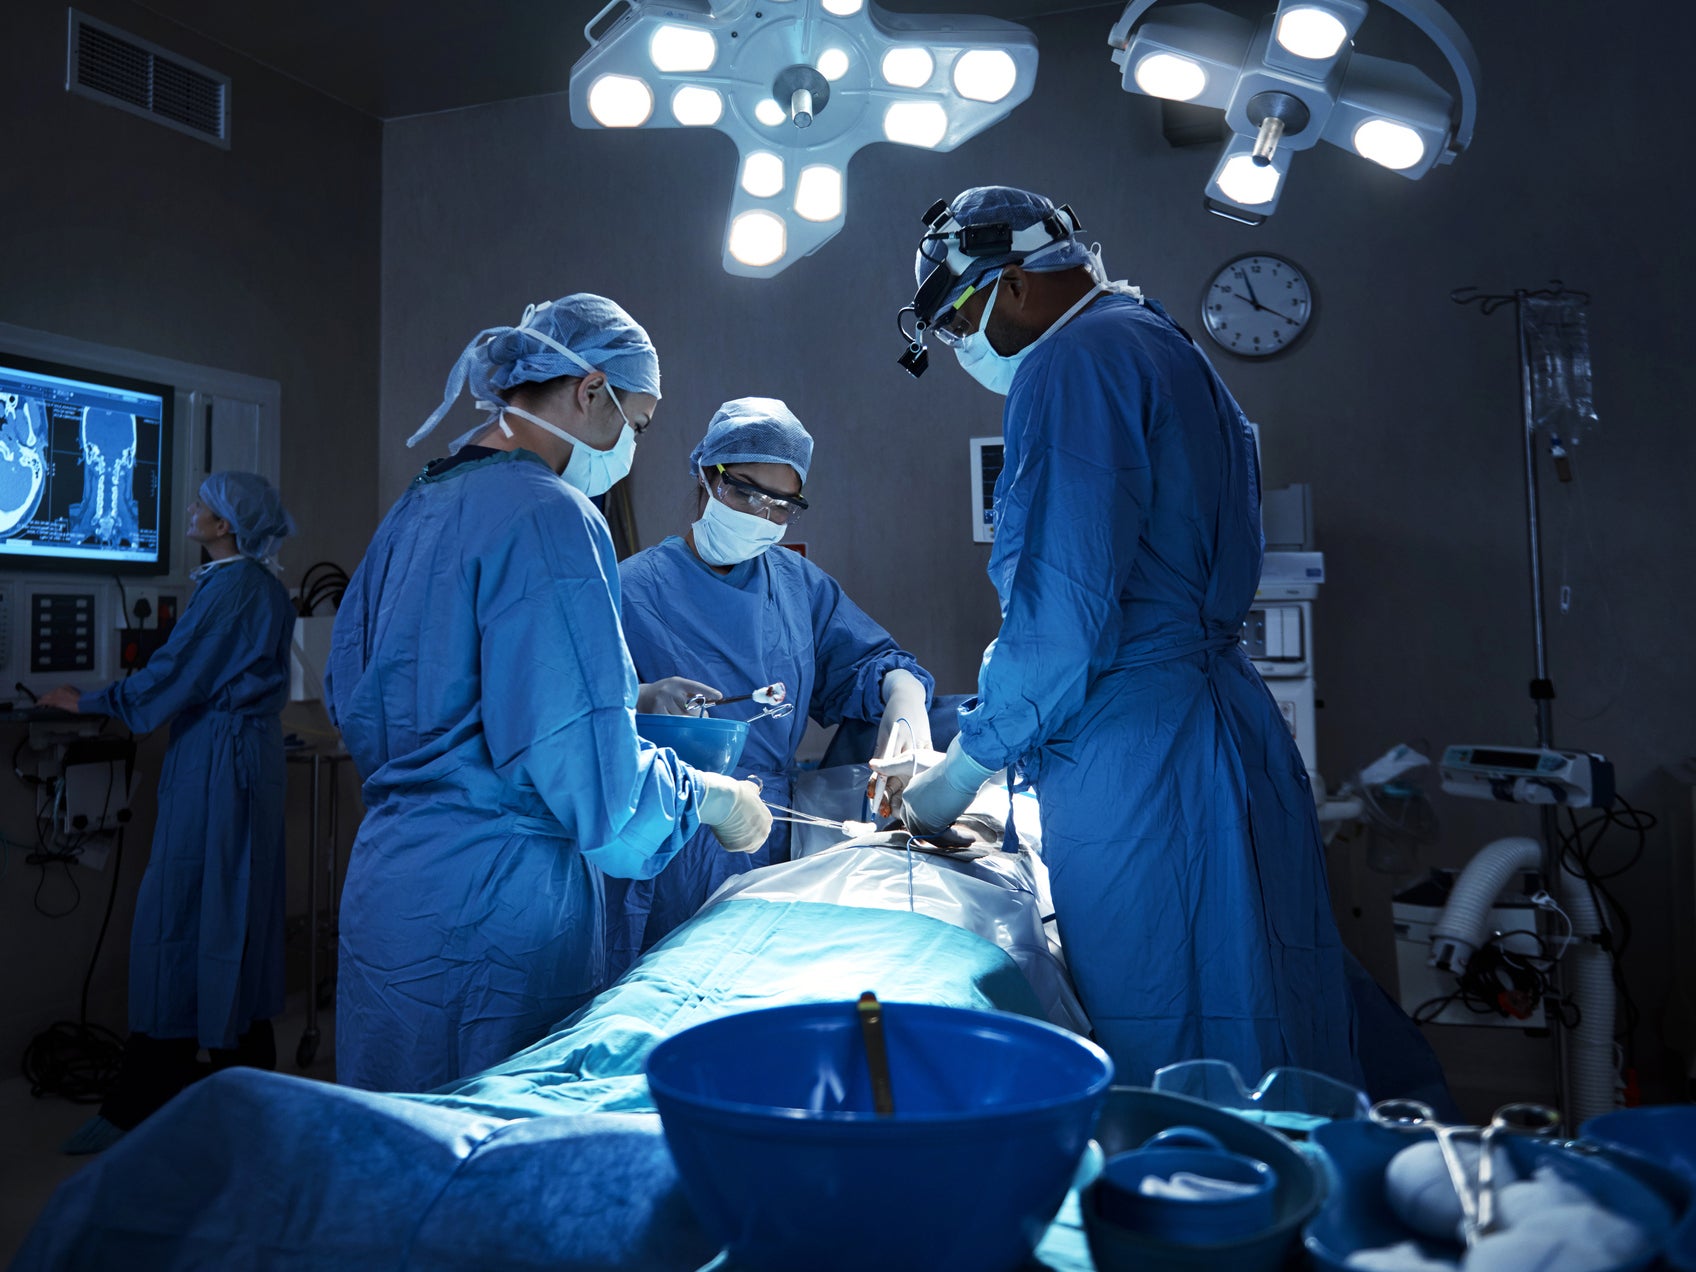 Surgeons Describe Their “Oh Sh*t” Moments In The Operating Room